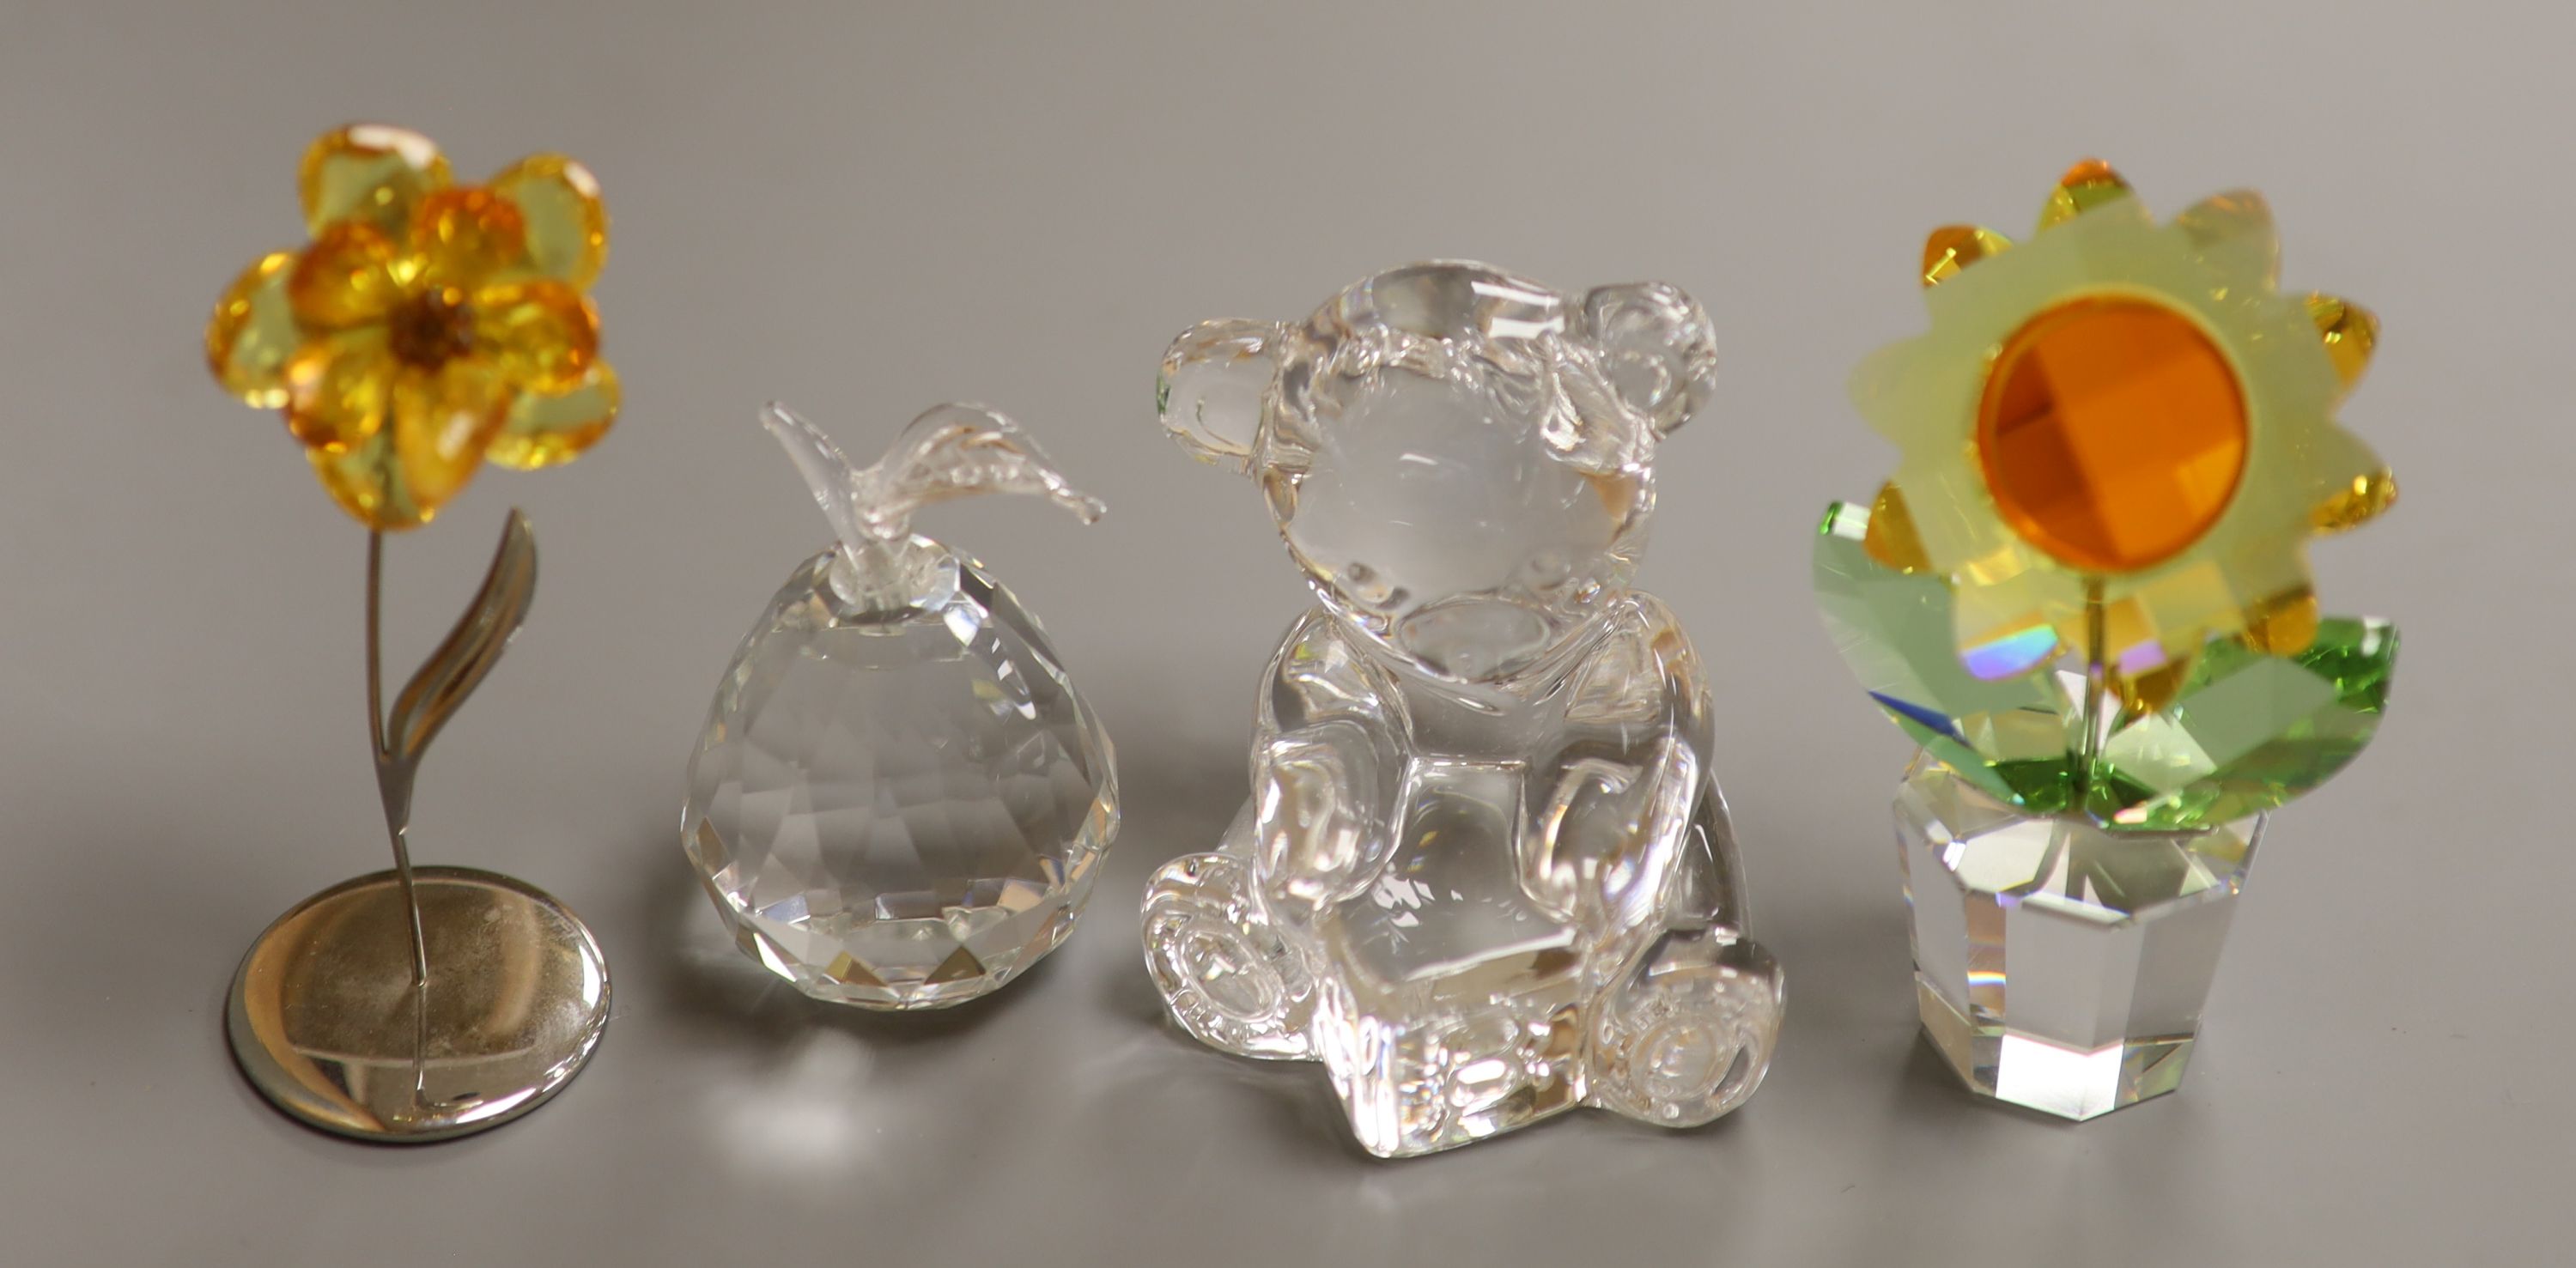 A Swarovski 'Sunflower', with topaz centre and yellow petals in clear glass pot (boxed), a smaller yellow flower and a Waterford crystal teddy bear